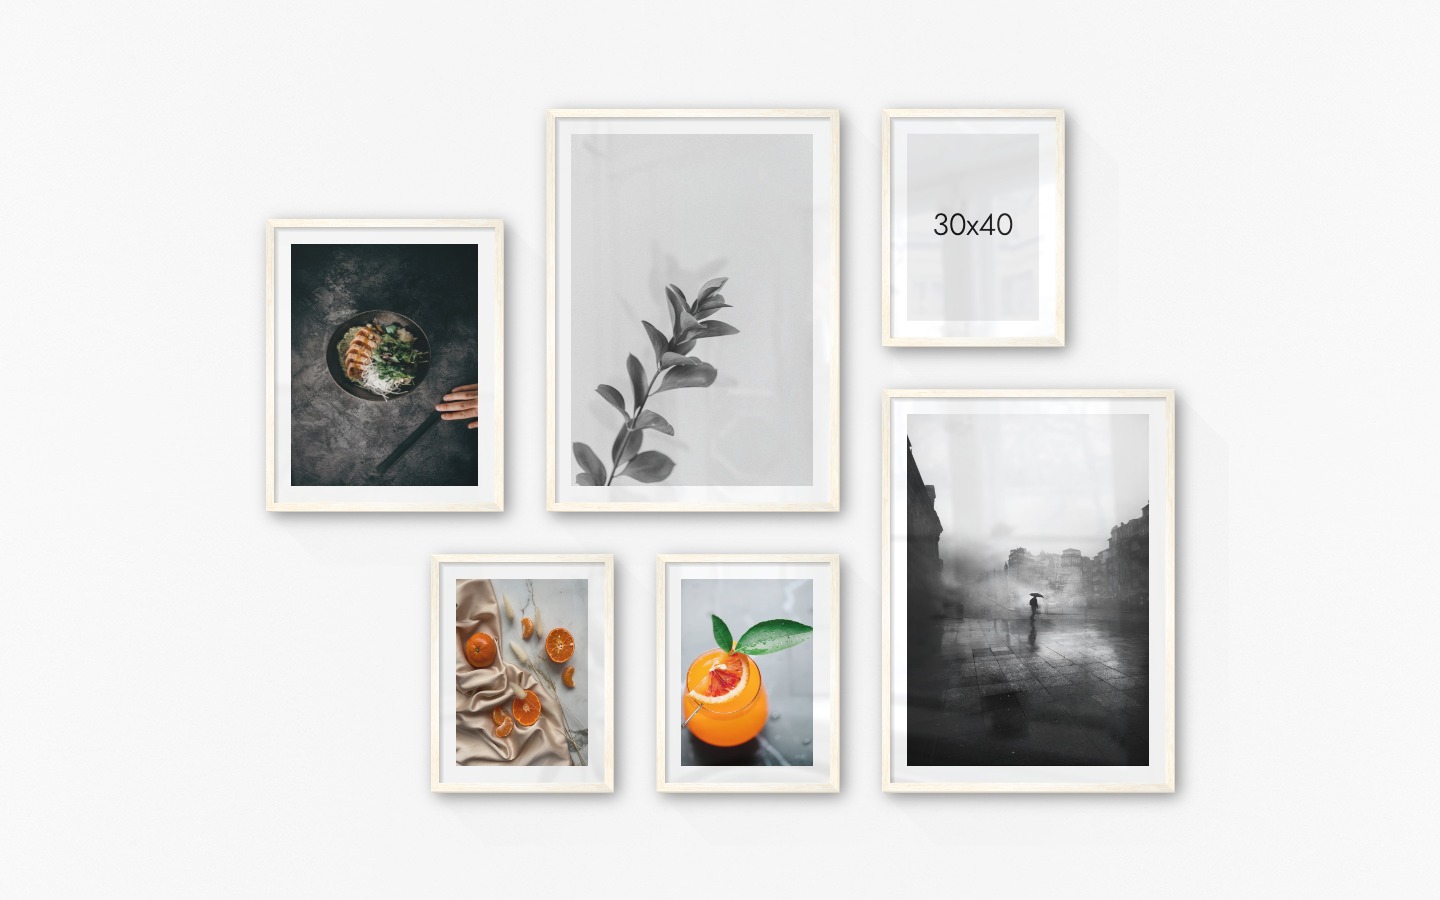 Gallery wall with picture frames in light wood in sizes 40x50, 50x70 and 30x40 with prints "Bowl", "Twig", "Oranges", "Orange drink" and "Rainy city"